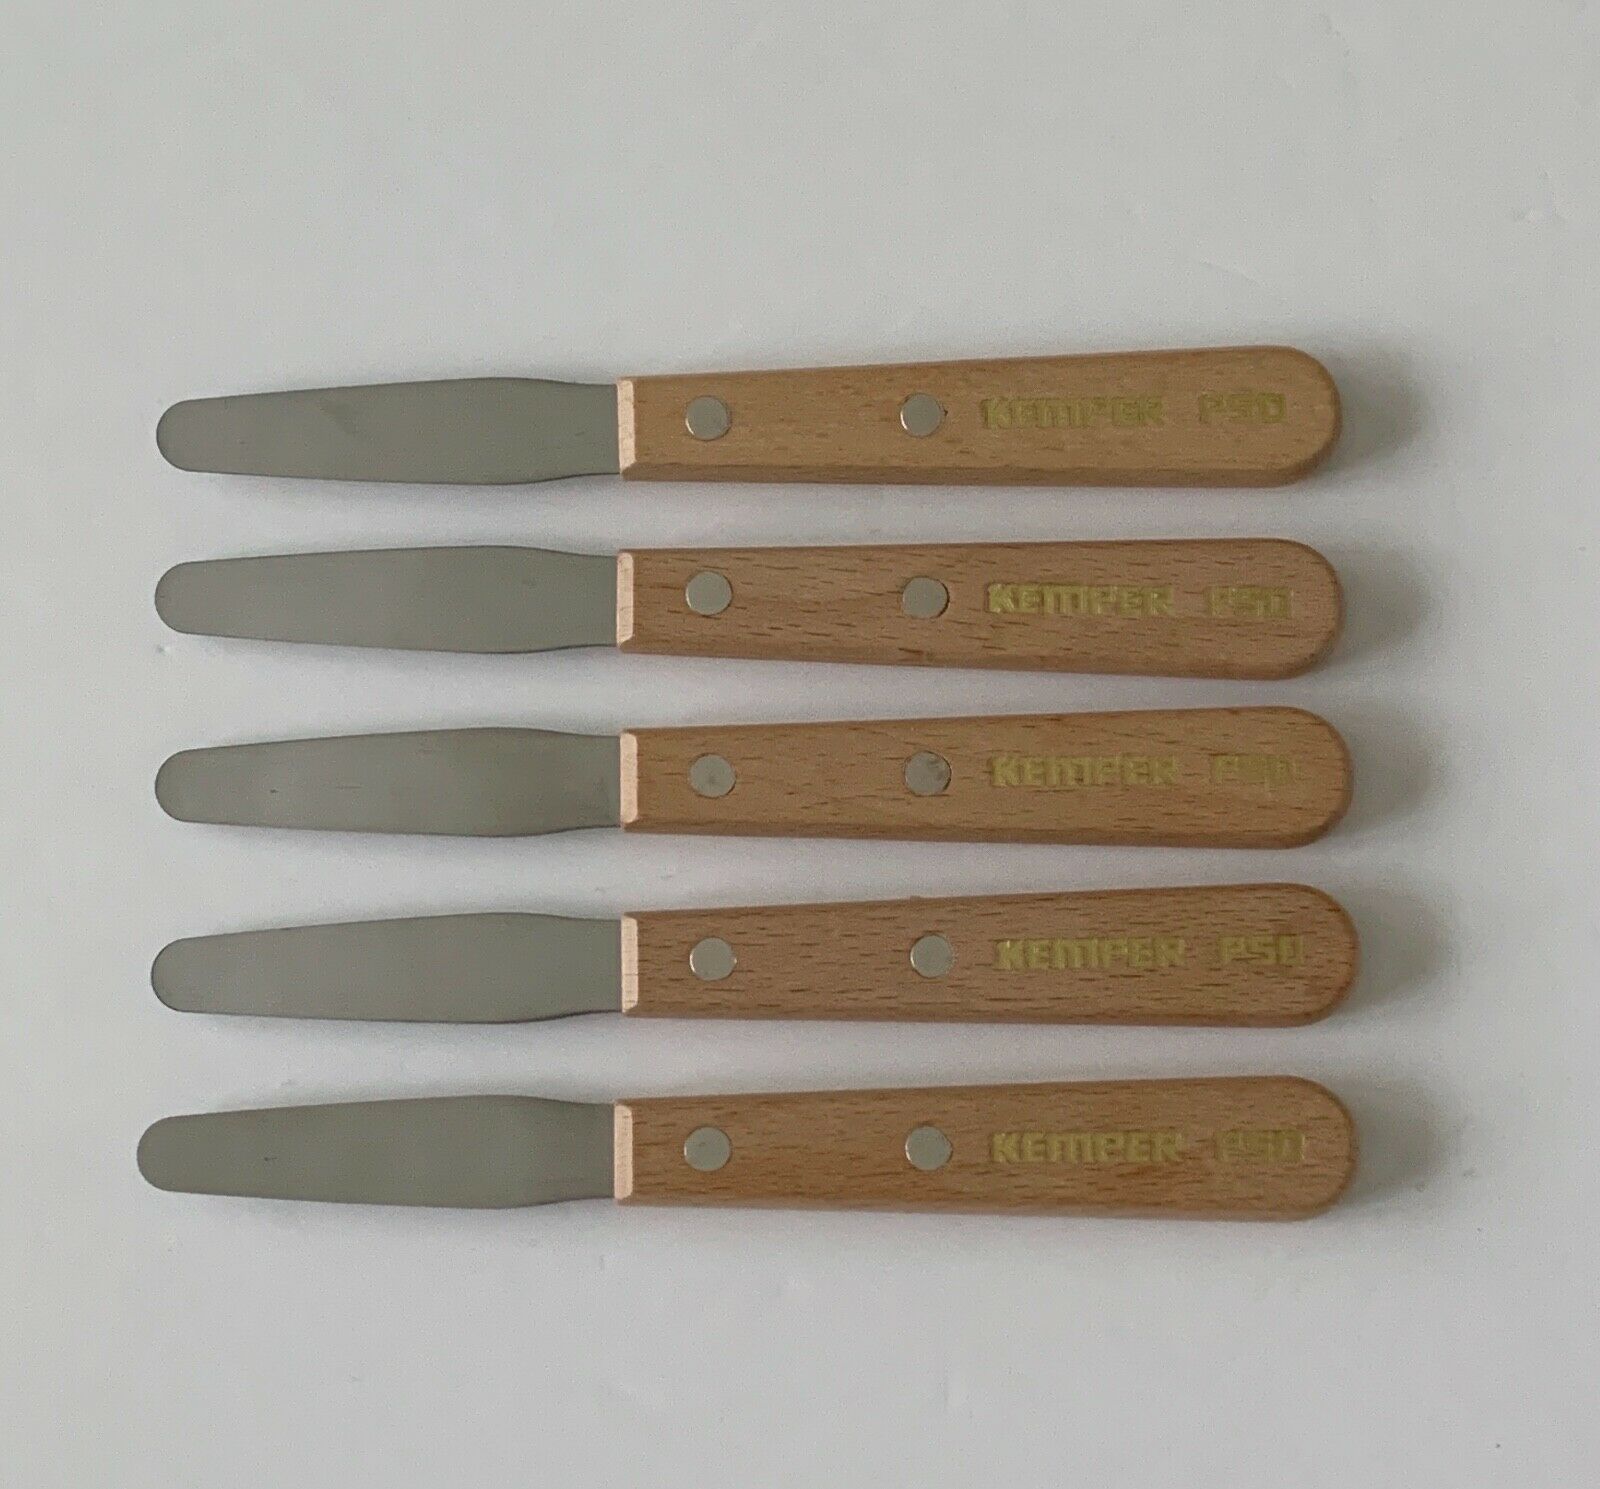 Kemper Tools P5d Palette Knife Stainless Steel Wood Handle Lot Of 5 Brand New